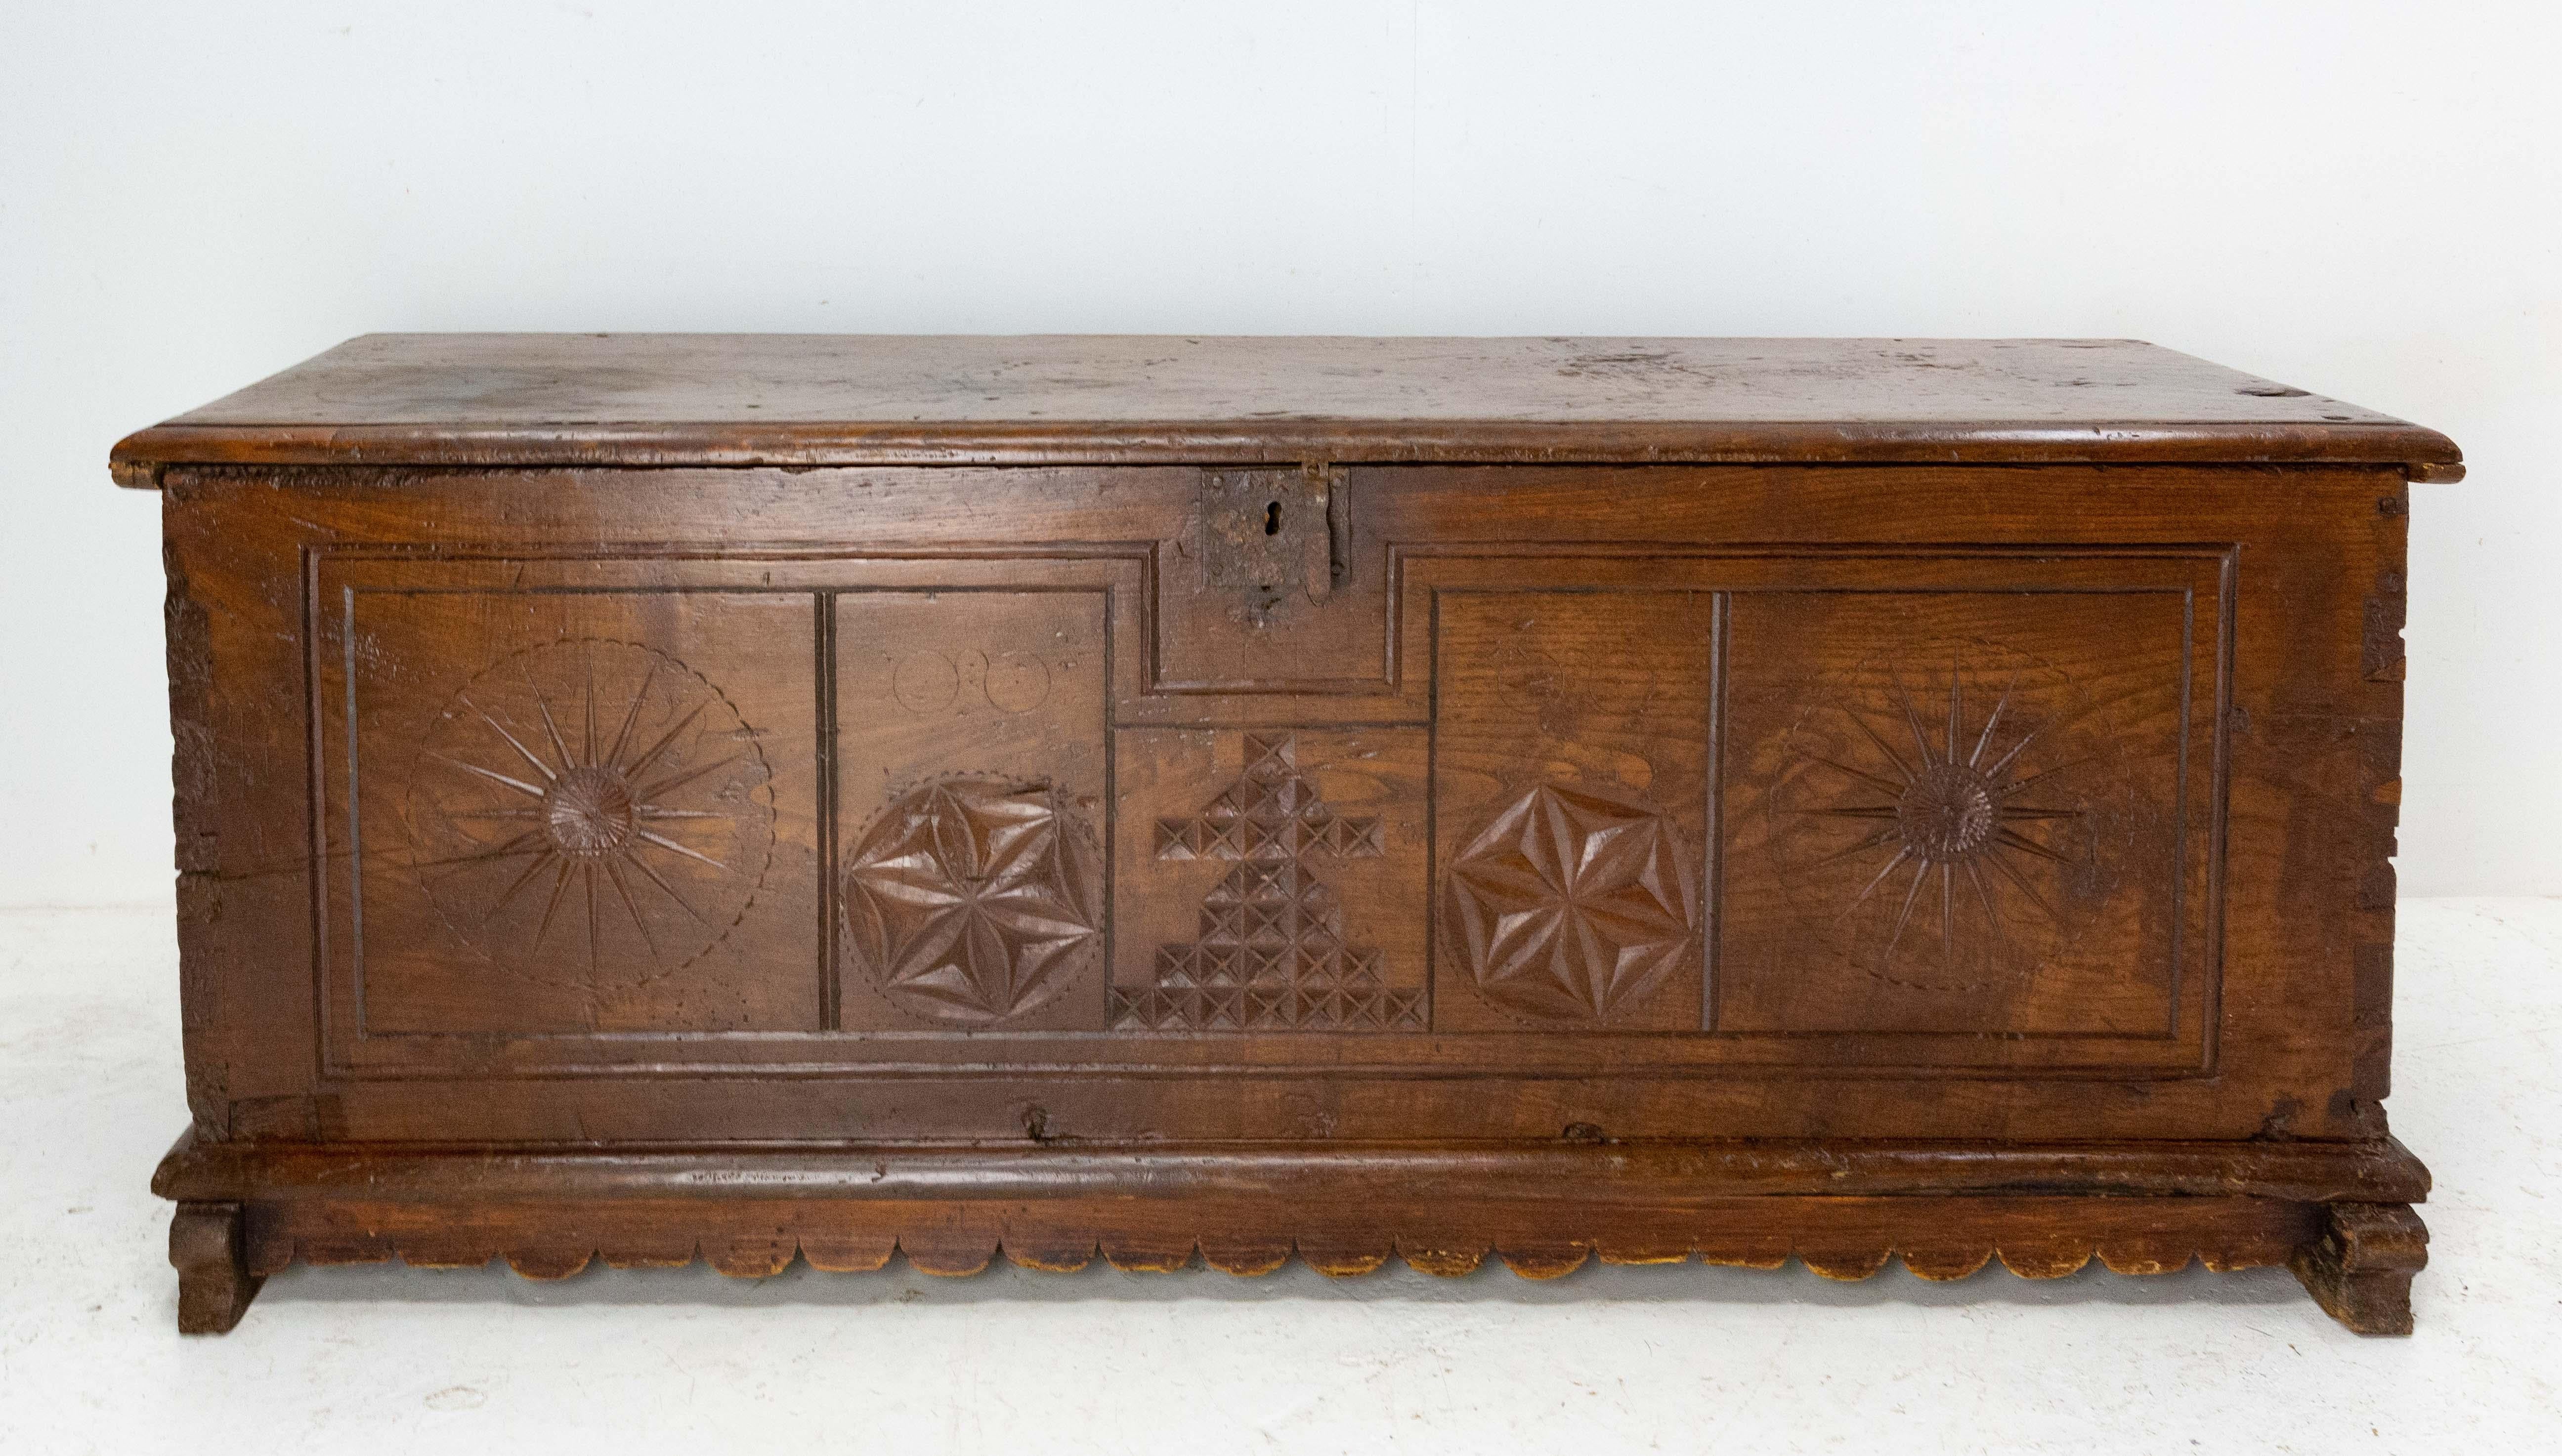 Coffer or chest French 18th century carved oak
French Provincial Country House
Very decorative and full of character
Decorated with geometrical motifs
This chest has the ideal size to serve as an end bed.
Very good antique condition for its